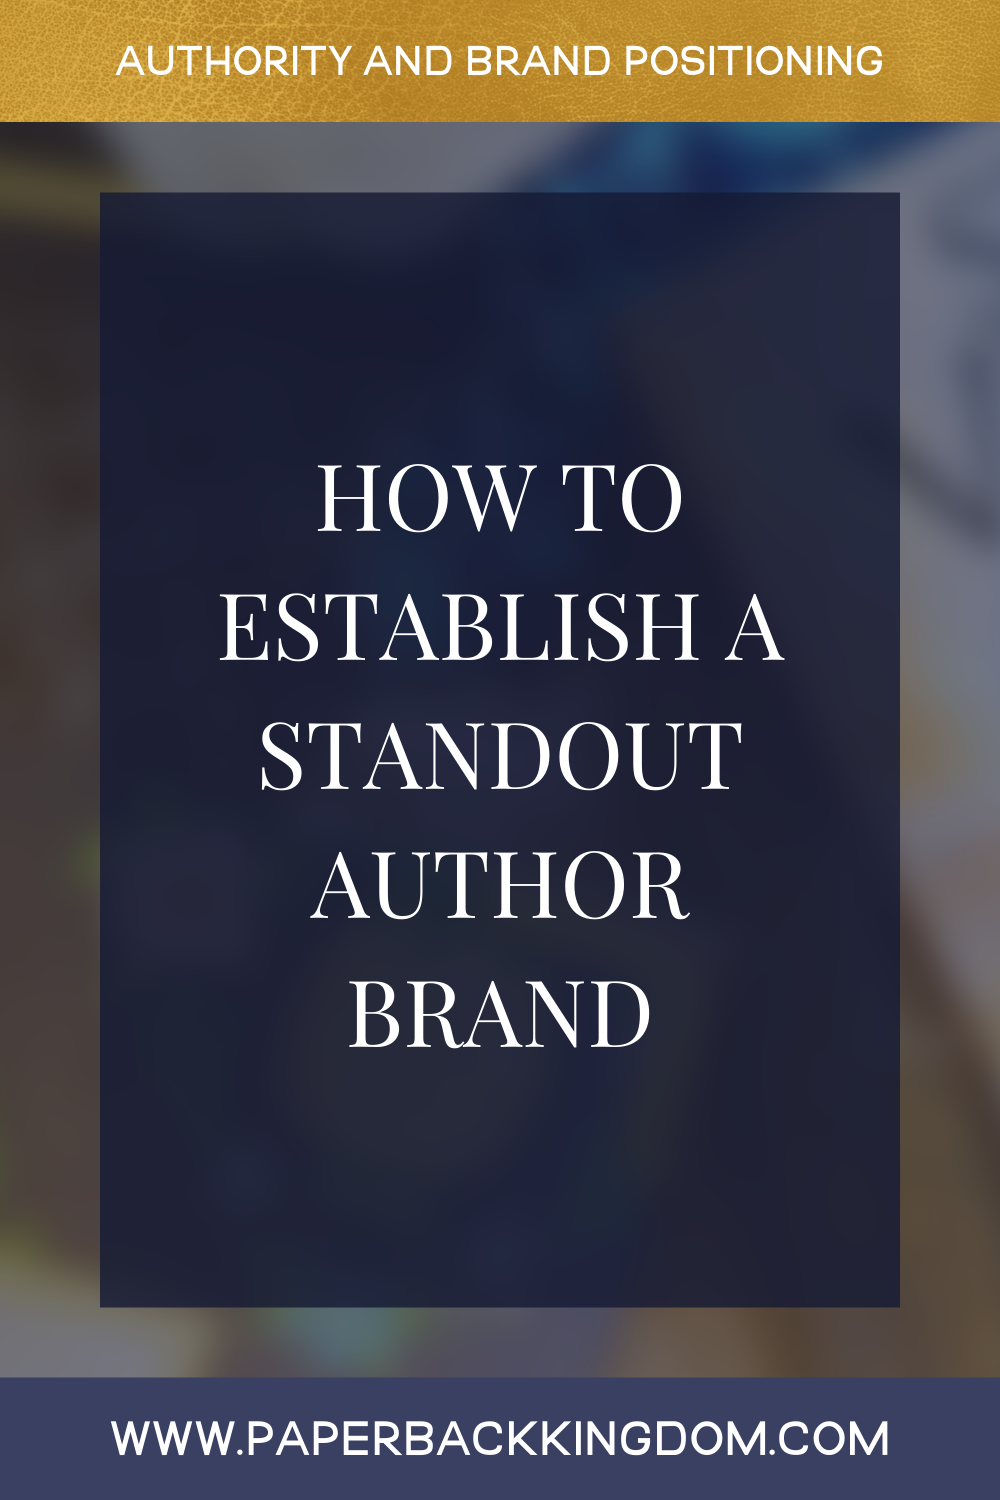 How To Establish A Standout Author Brand - There are four simple pillars you can start to dive into today to build a stand-out author brand, and we’re going to explore those one by one.